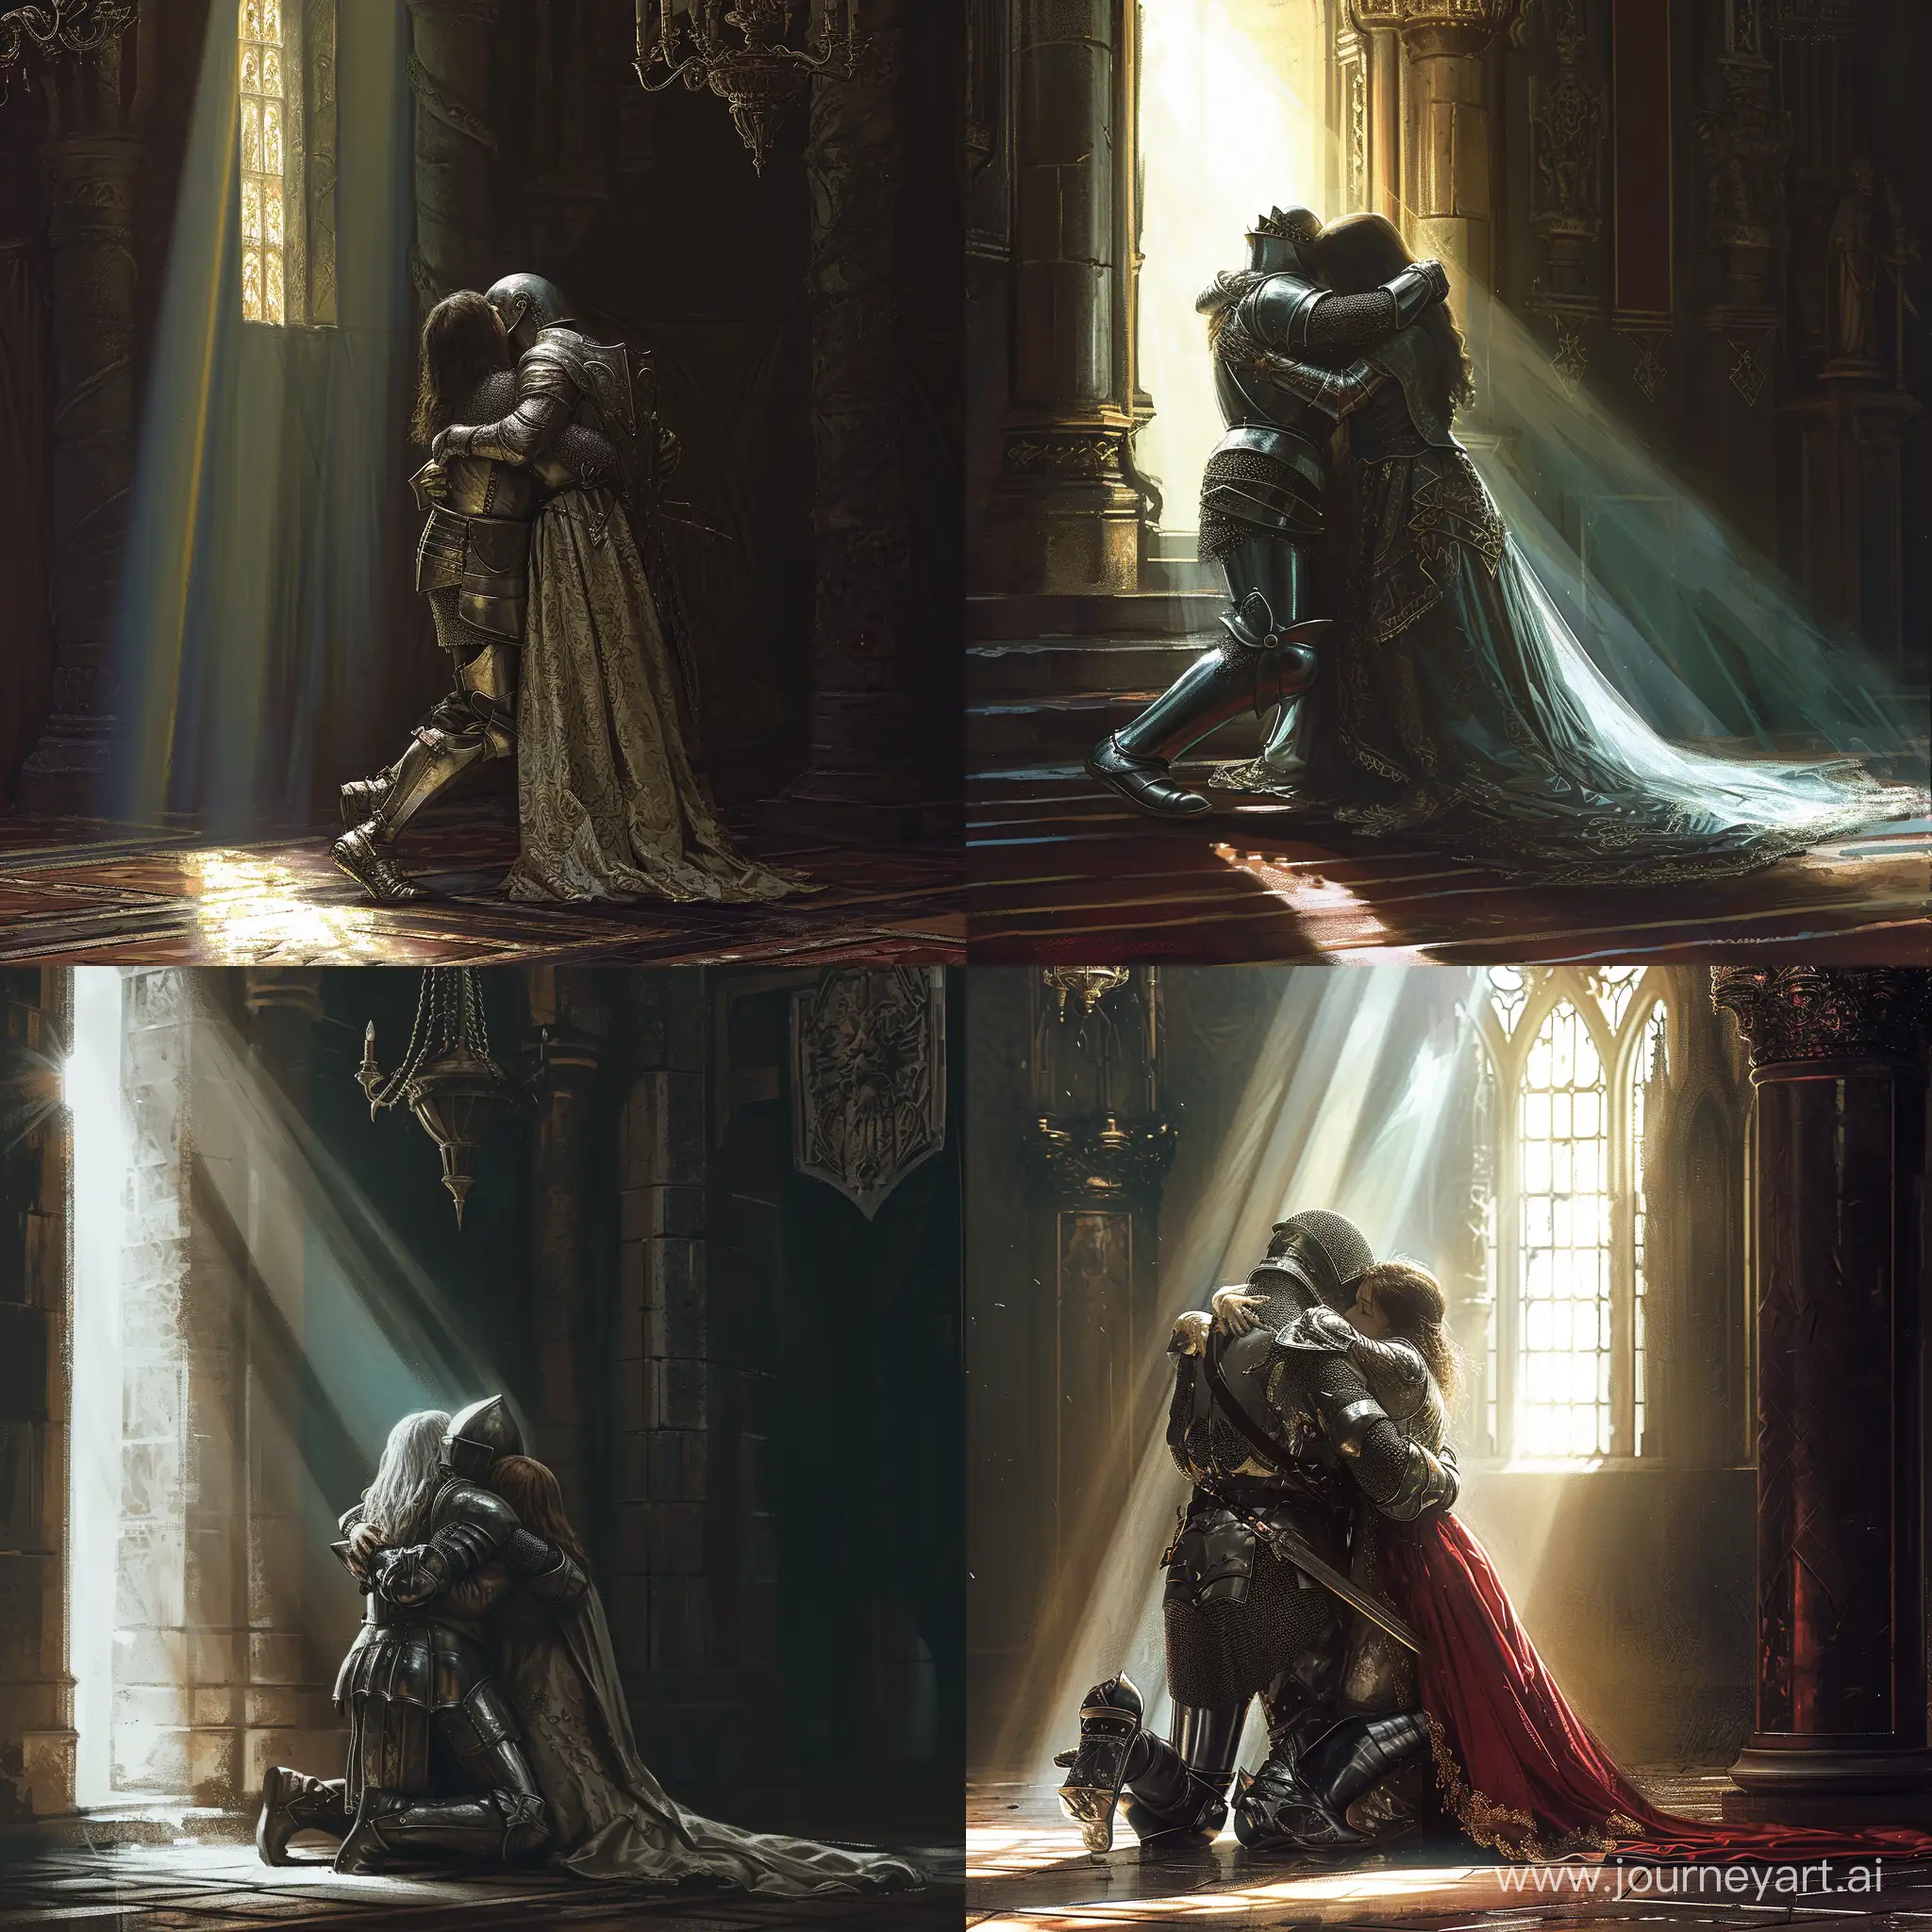 a knight on knees hugging a royal queen, inside a royal palace, sunlight seeps through the window, 1970's dark fantasy book cover style done in dungeons and dragons, detailed, dark lighting, gritty